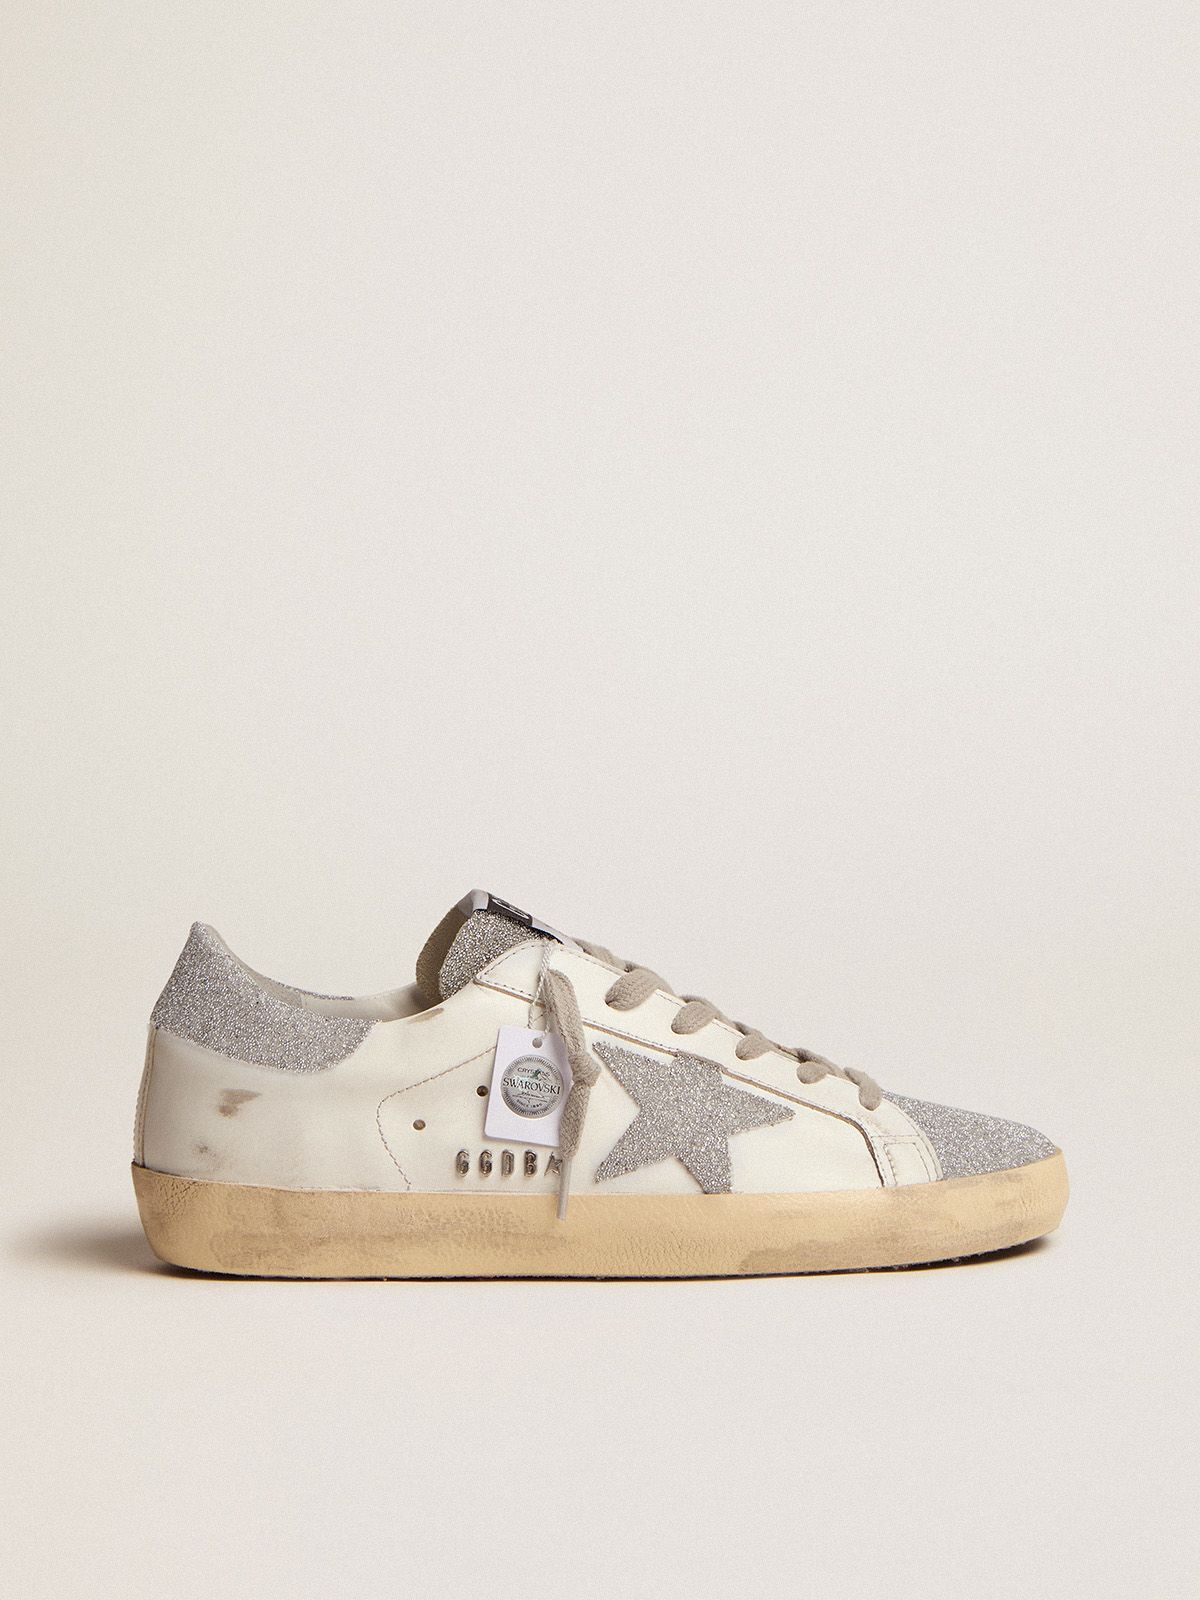 golden goose and sneakers white inserts upper Swarovski crystal Super-Star leather with